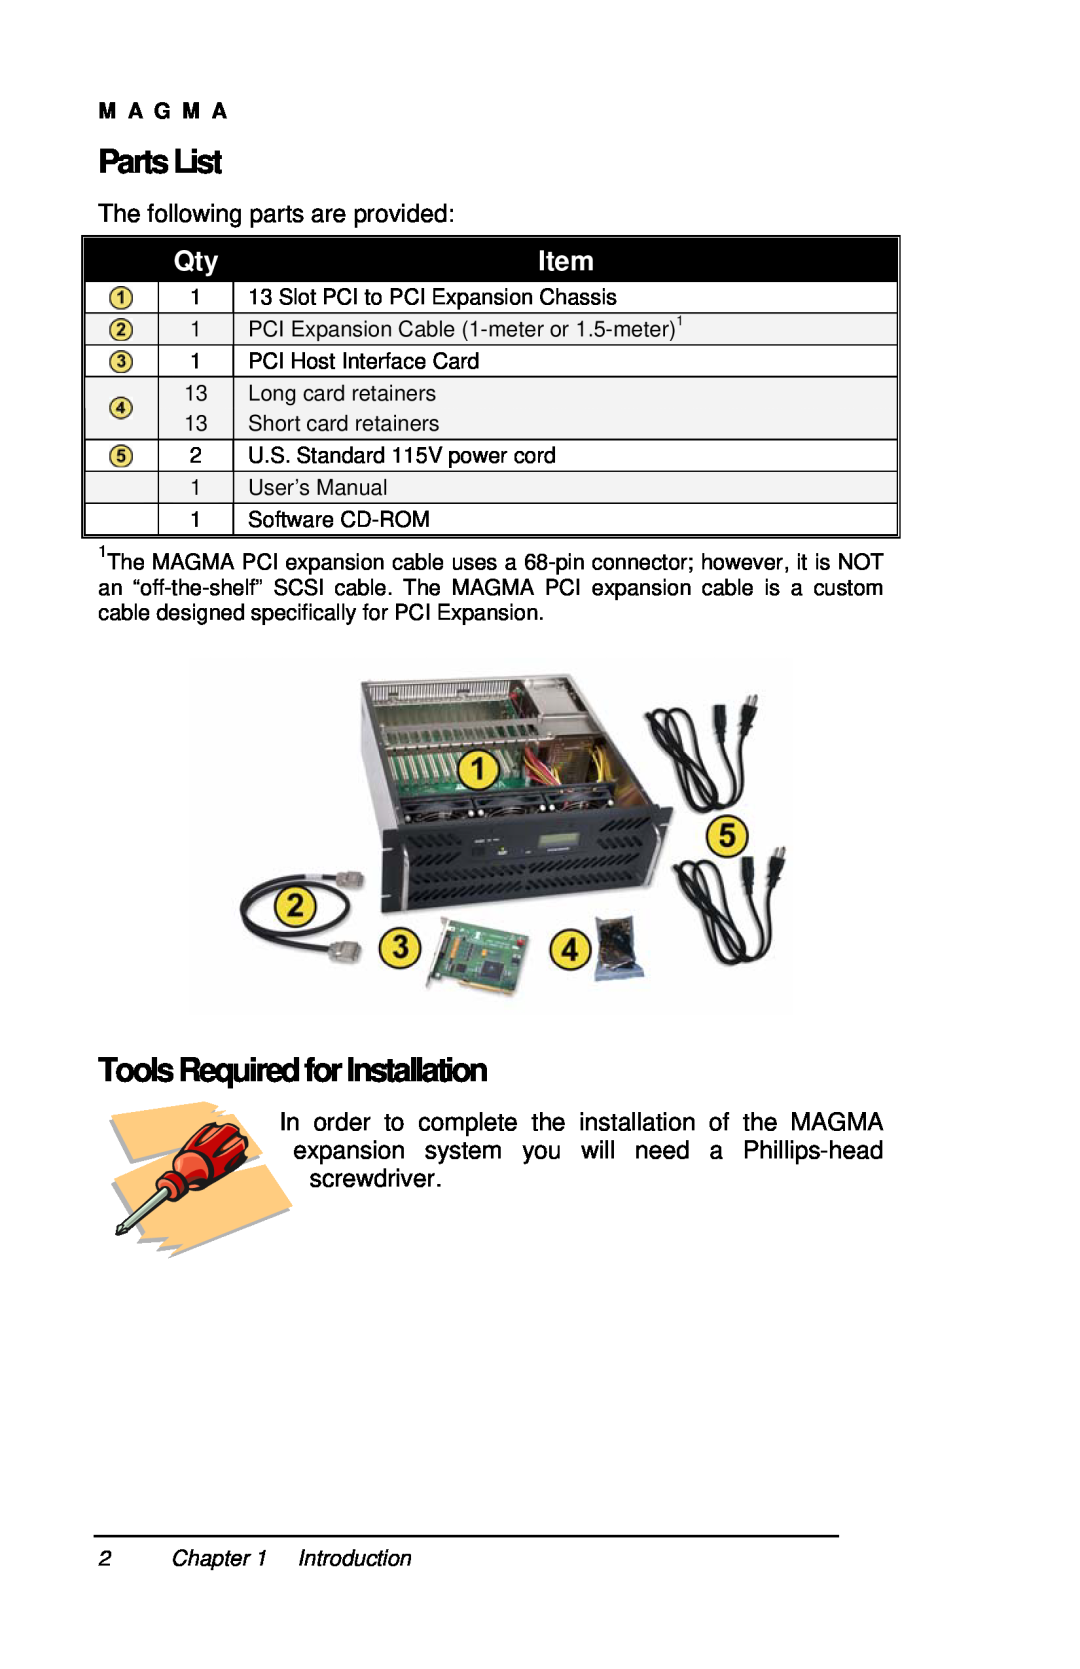 Magma P13RR-TEL user manual PartsList, ToolsRequiredforInstallation, M A G M A, Introduction 